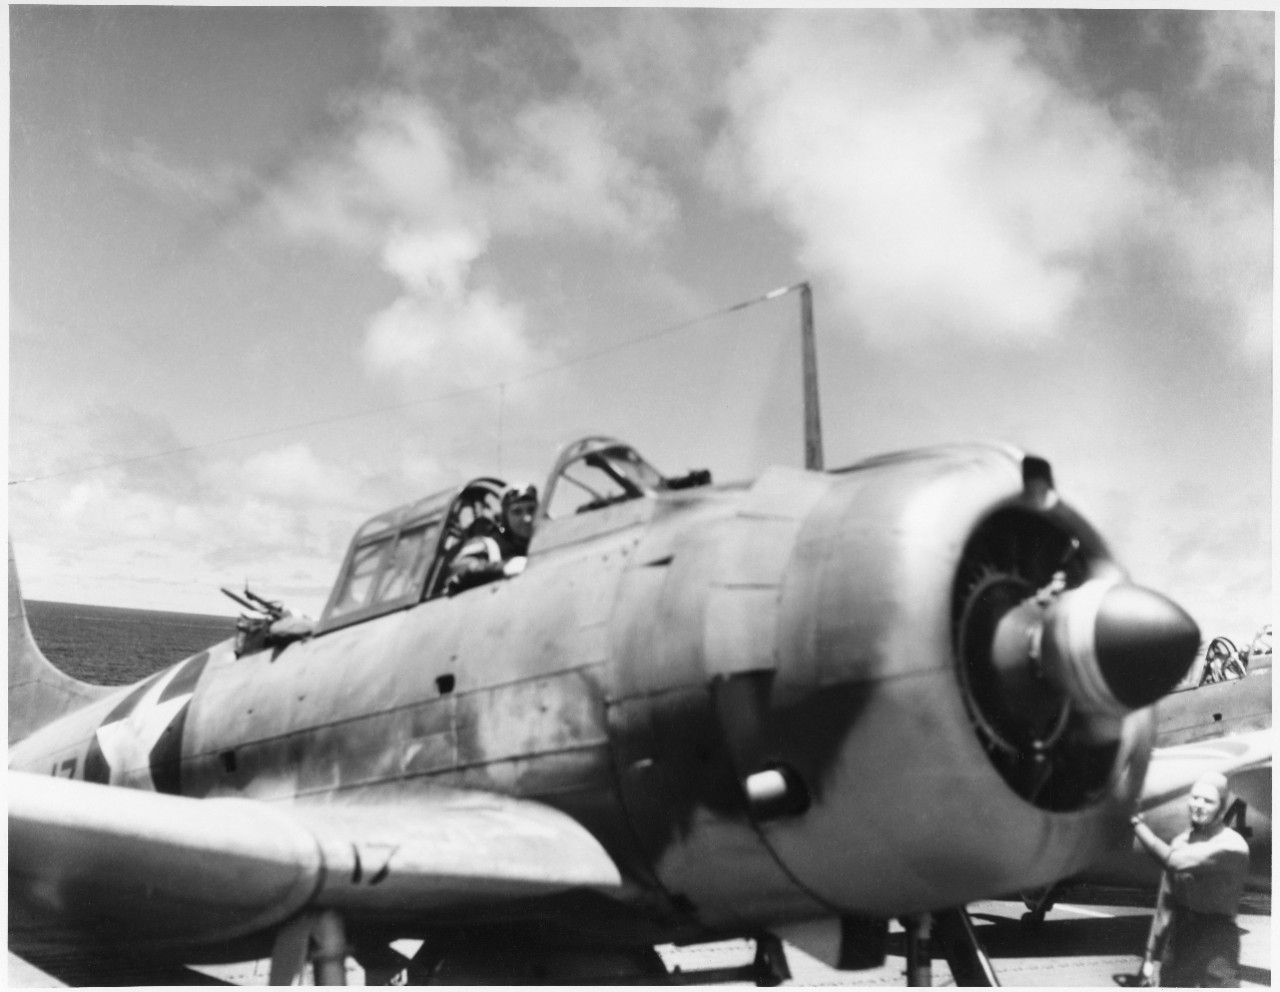 Photo #: 80-G-312000  Battle of Midway, June 1942